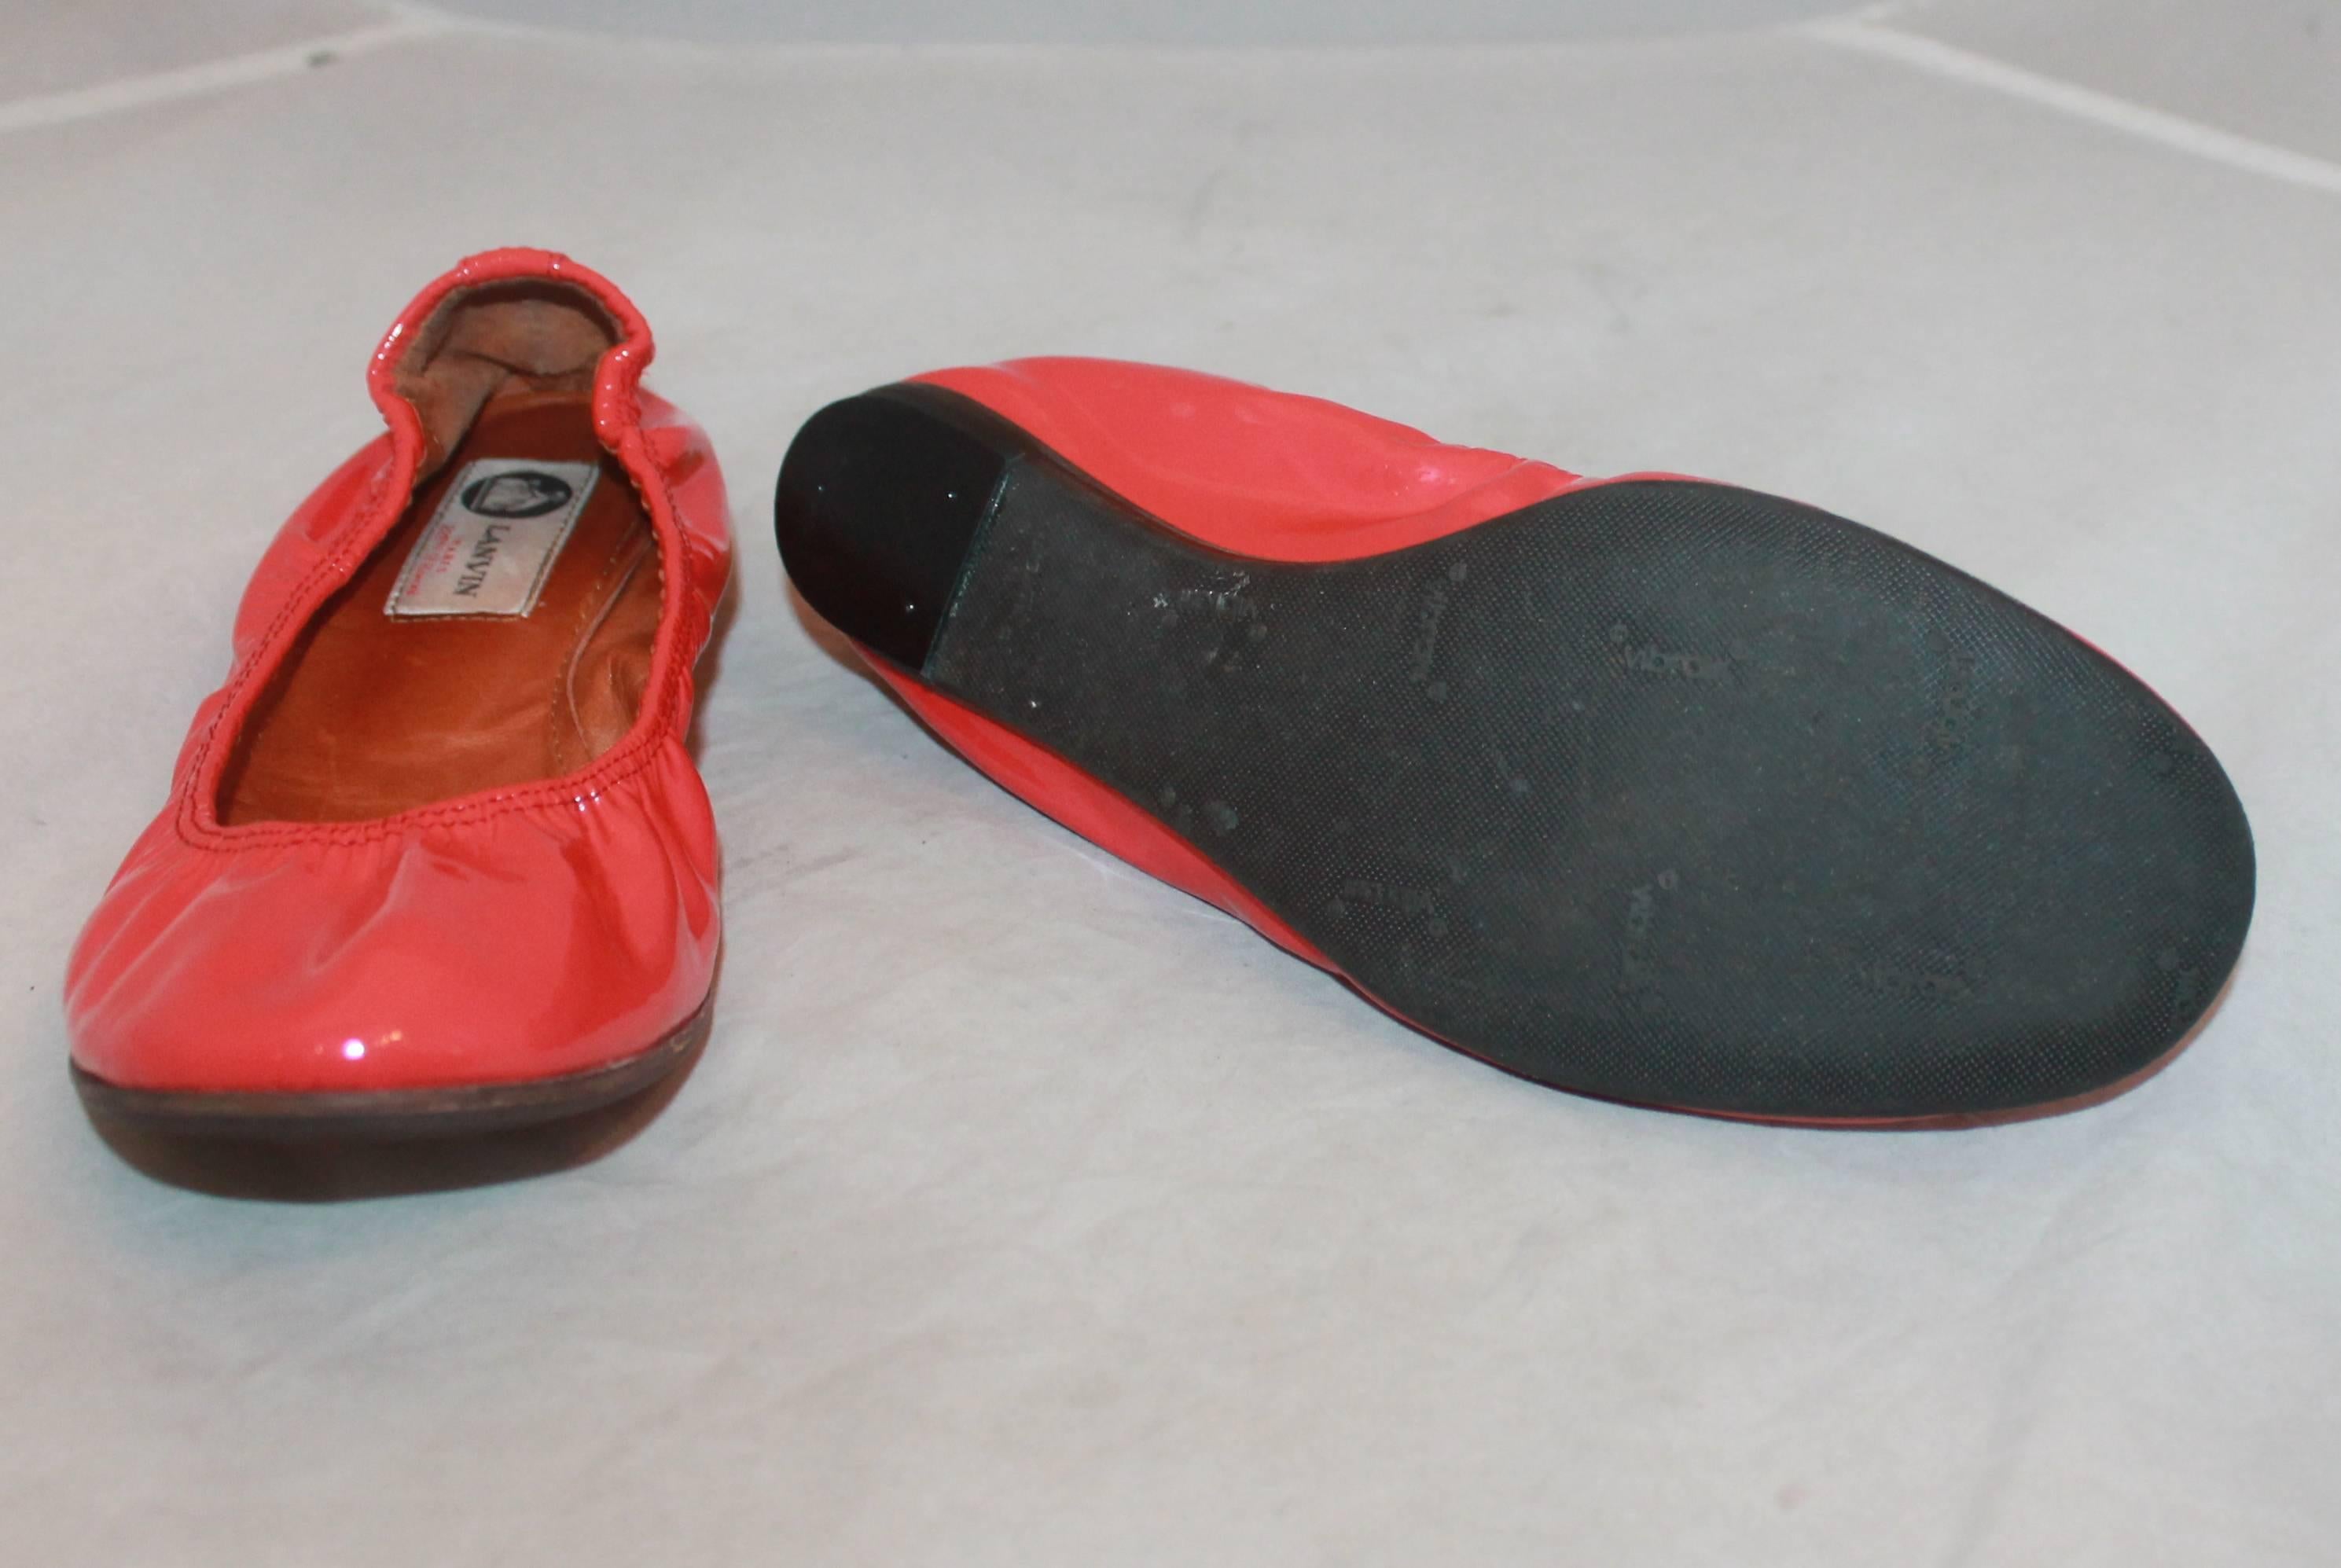 Women's Lanvin Coral Patent Ballet Flats w/ Interior Leather Lining - 8